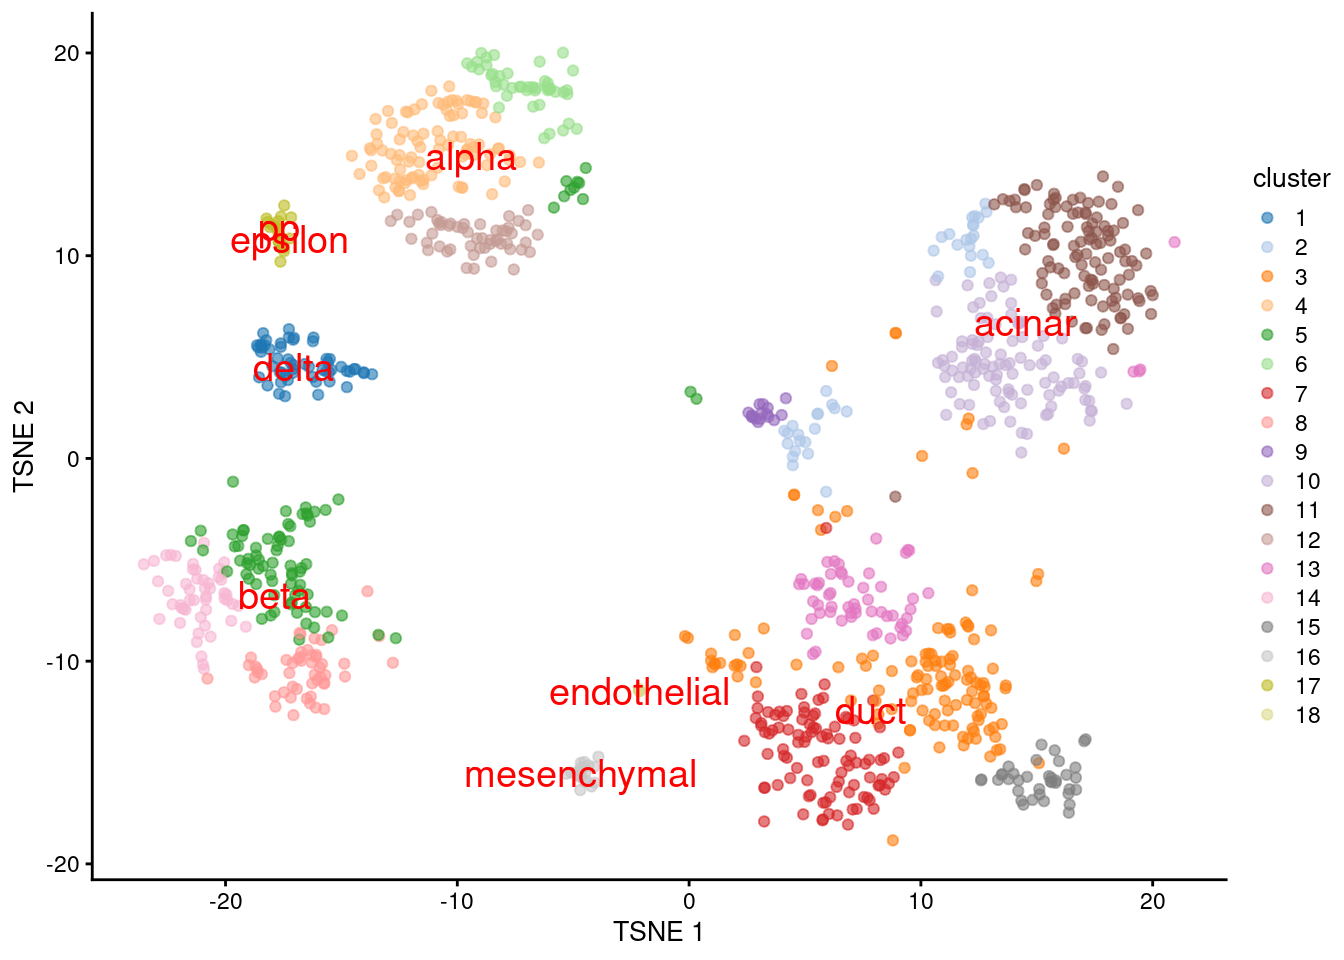 $t$-SNE plot of the Grun dataset, where each point is a cell and is colored by the assigned cluster. Reference labels from the Muraro dataset are also placed on the median coordinate across all cells assigned with that label.